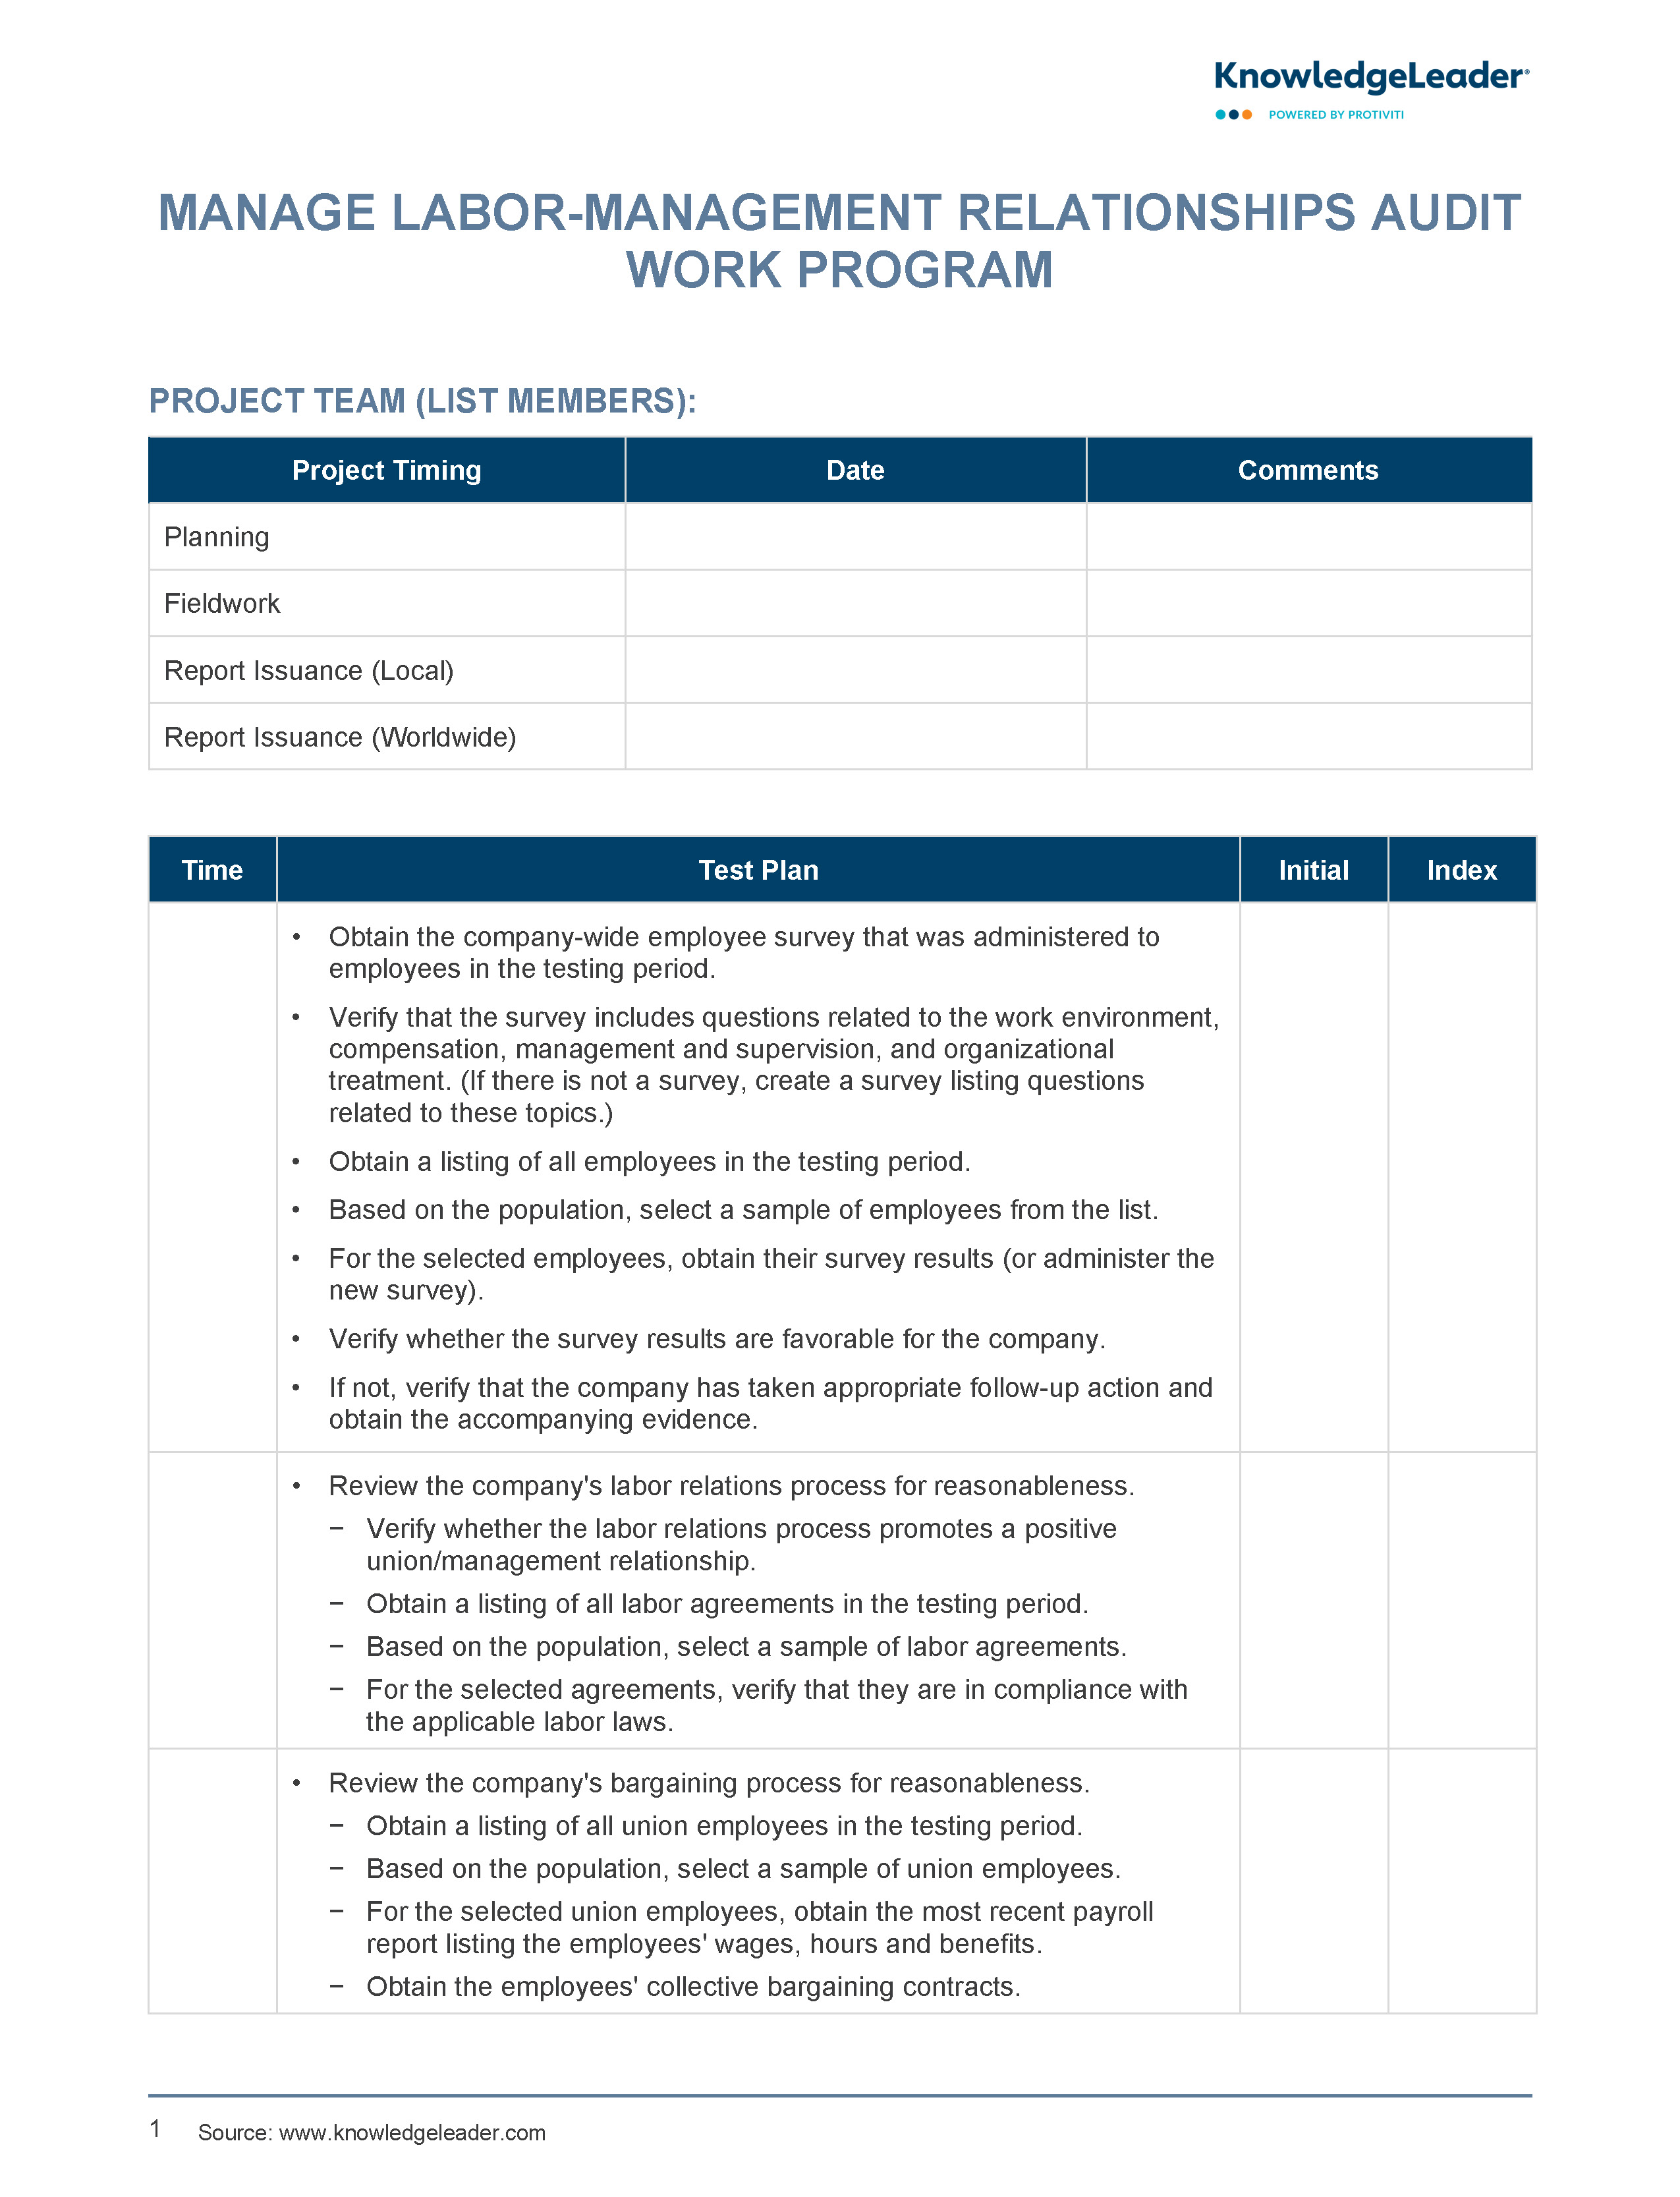 Screenshot of the first page of Manage Labor-Management Relationships Audit Work Program